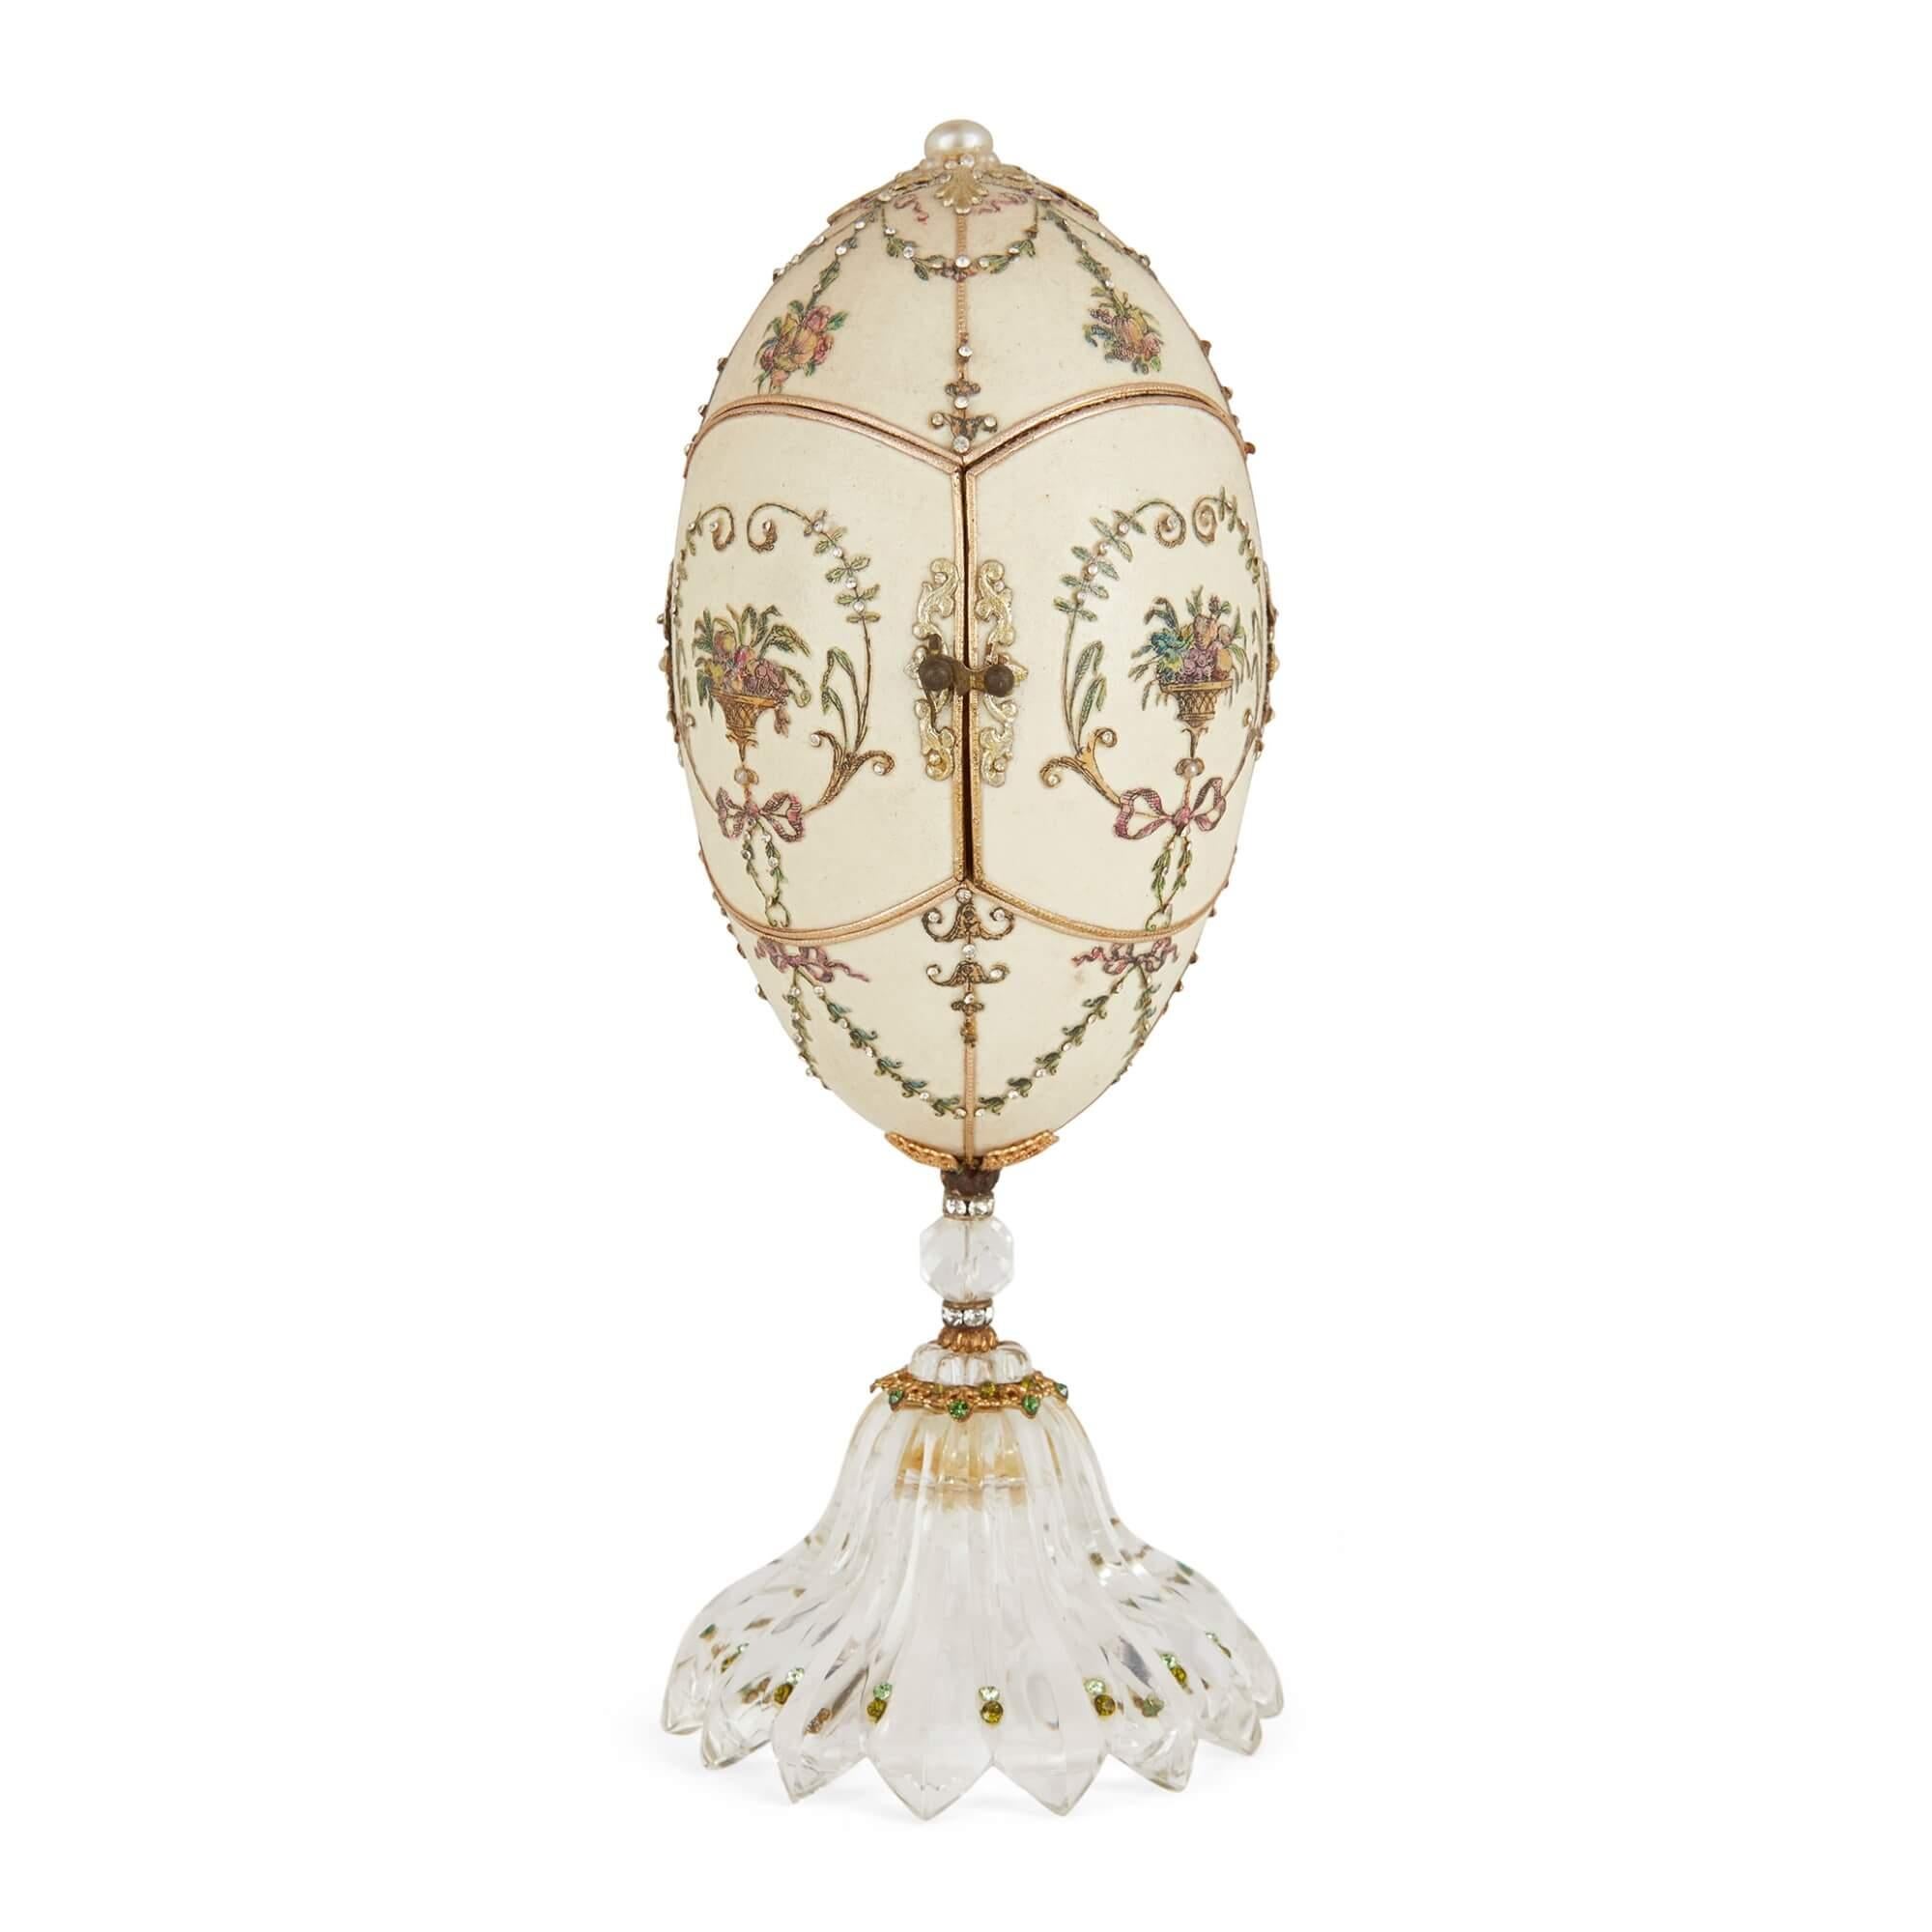 Antique semi-precious stone and silver-gilt egg model
Continental, Late 19th Century
Height 19cm, diameter 8cm

This superb decorative egg model is inset with a charming scene on the interior. 

The egg stands on a flared base of fluted rock